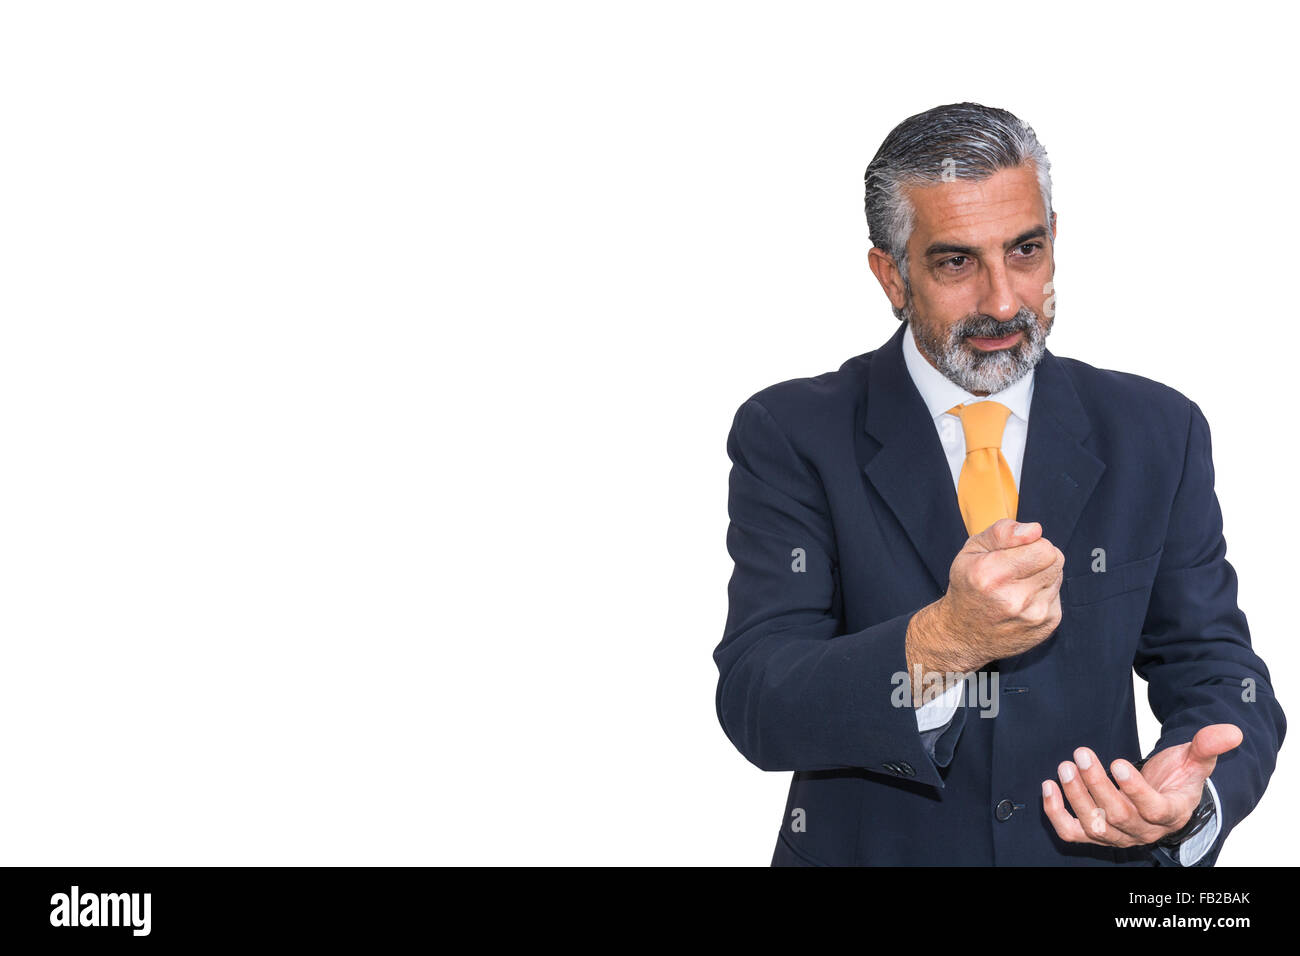 Businessman, engaged in business education. In suits, shaking hands and slams his fist on the other hand. Stock Photo